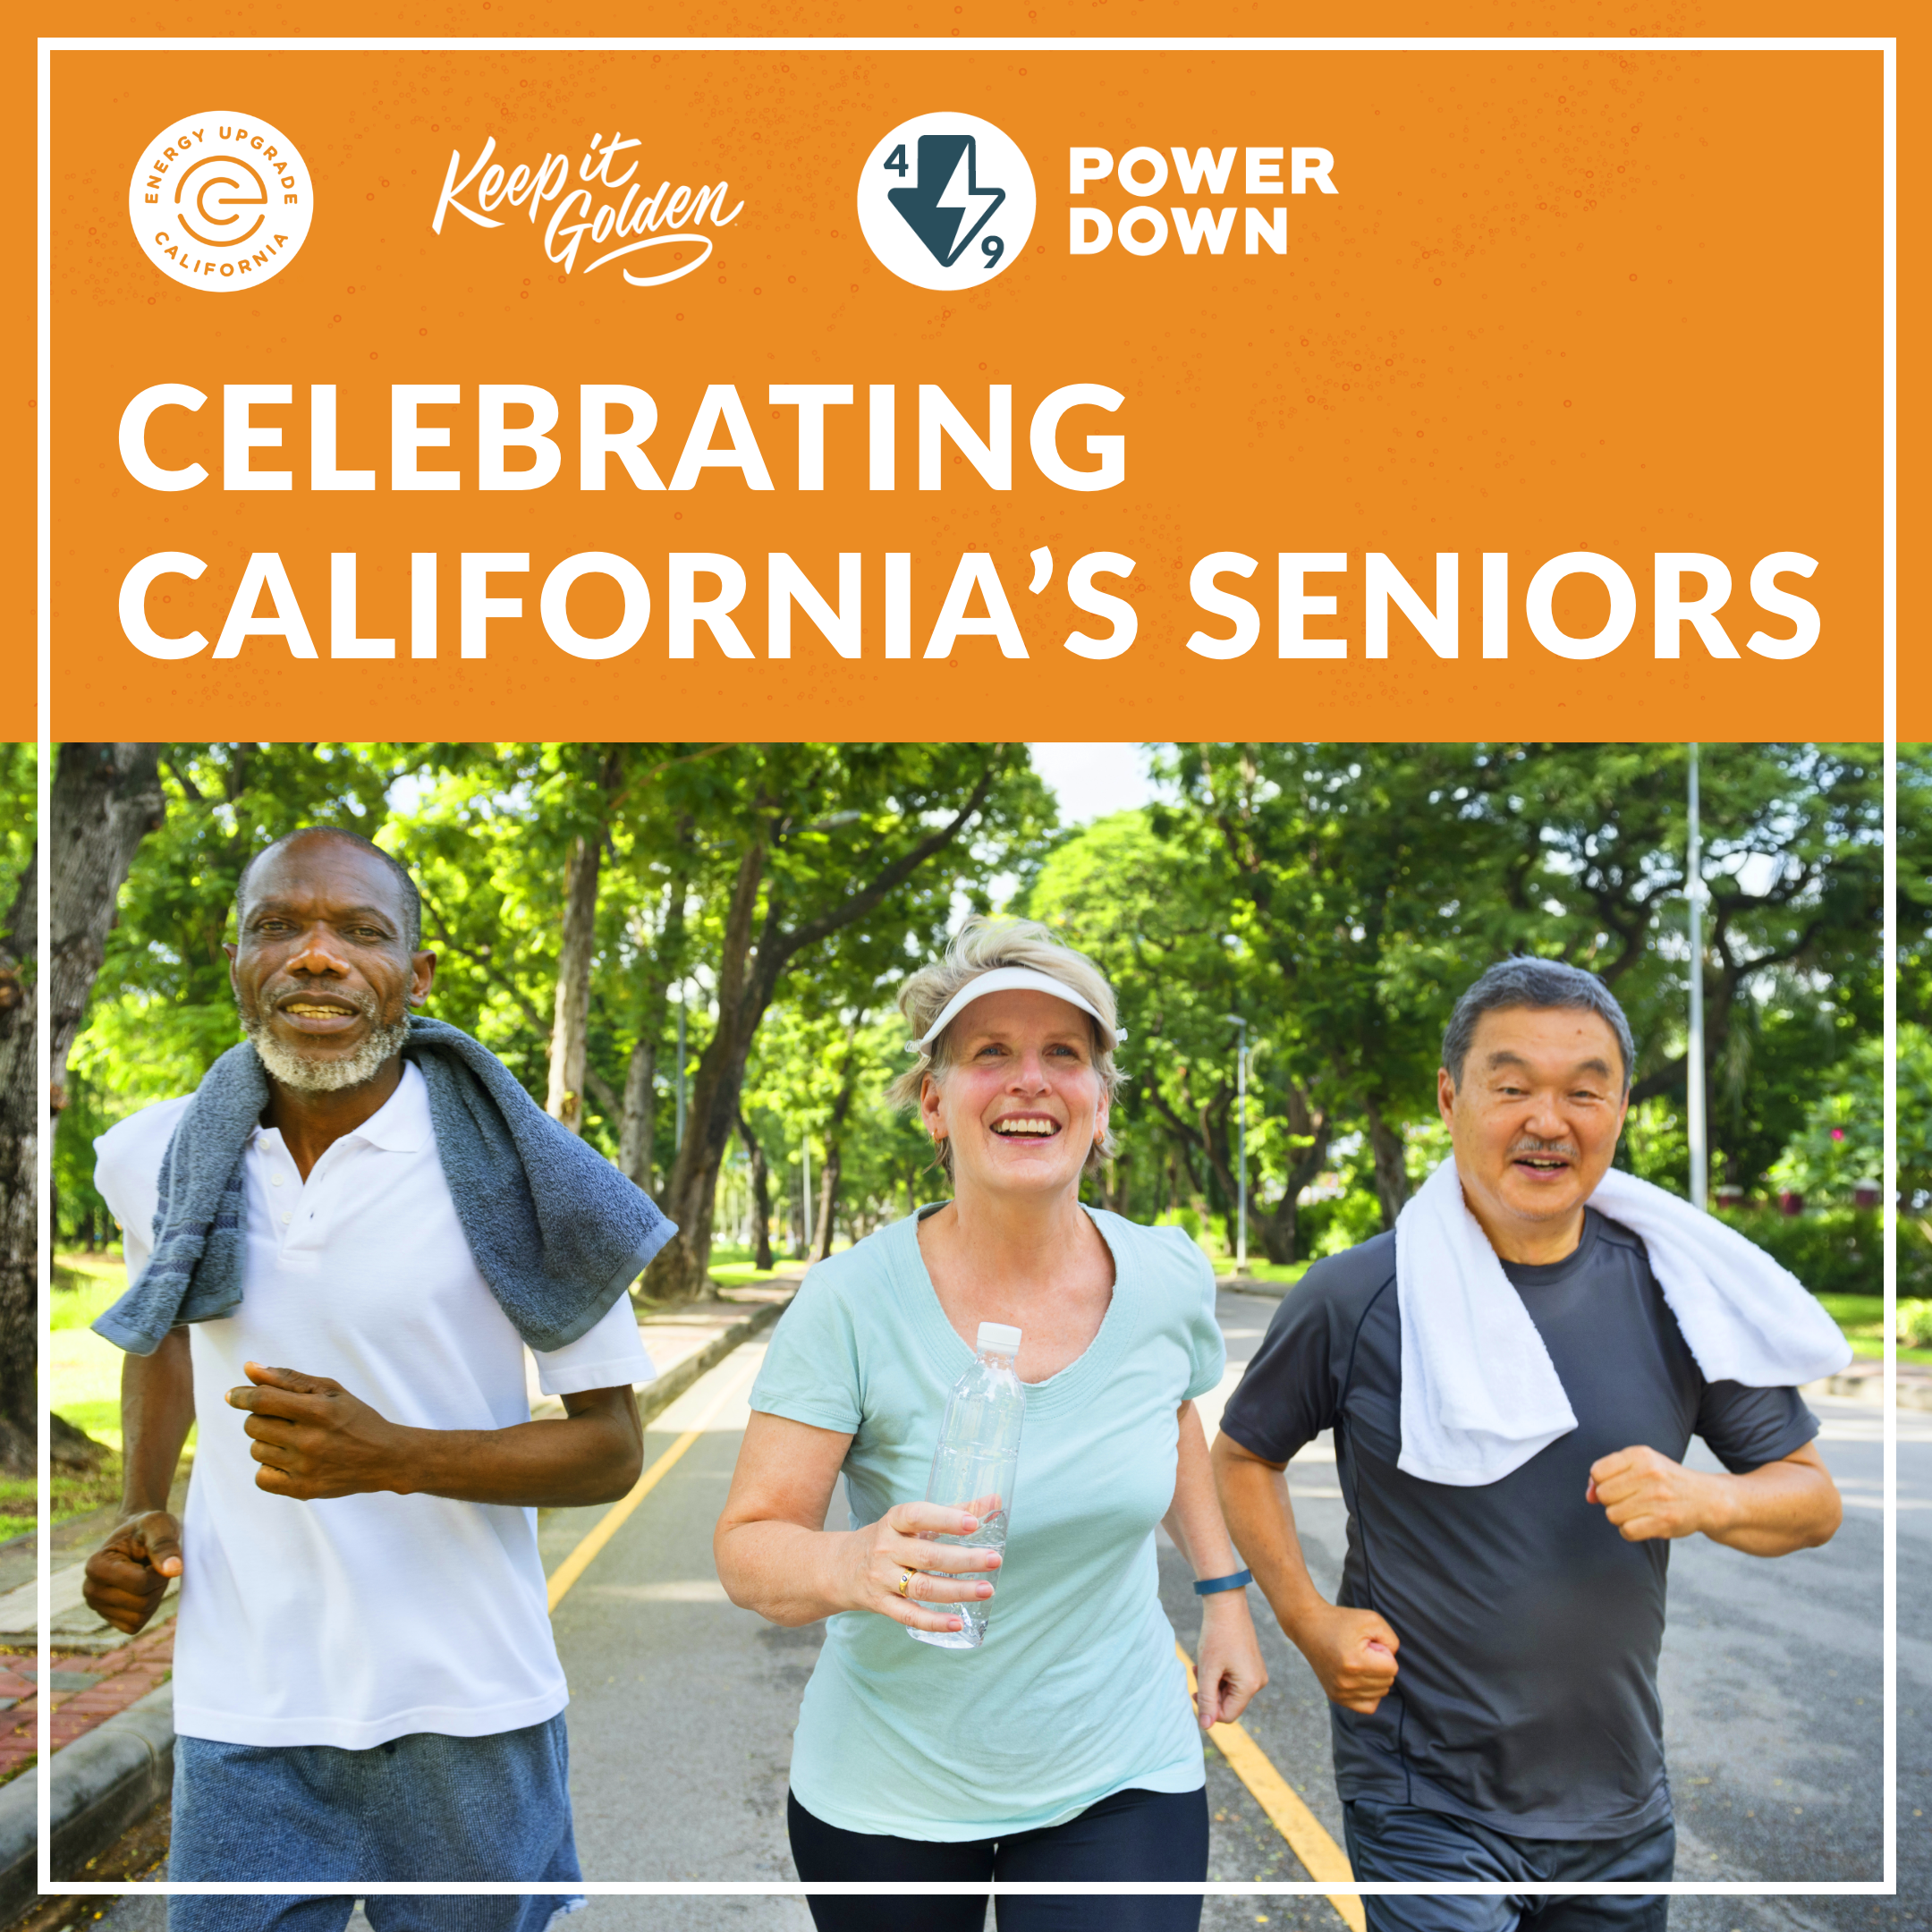 TOU: To all the seniors working to use more clean energy every day, thank you for leading by example and powering down from 4-9! #KeepItGolden https://www.energyupgradeca.org/the-movement/ #codie_riv [ID Description for ALT IMAGE: Outside background with trees lined back. Three people that look like seniors walking. On the left is a black person wearing white shirt with gray gym towel on the shoulder. In the center, a white person wearing sun visor and light green shirt, carrying bottle of water. On the right is an Asian person wearing dark gray shirt with white towel on the shoulder. ]